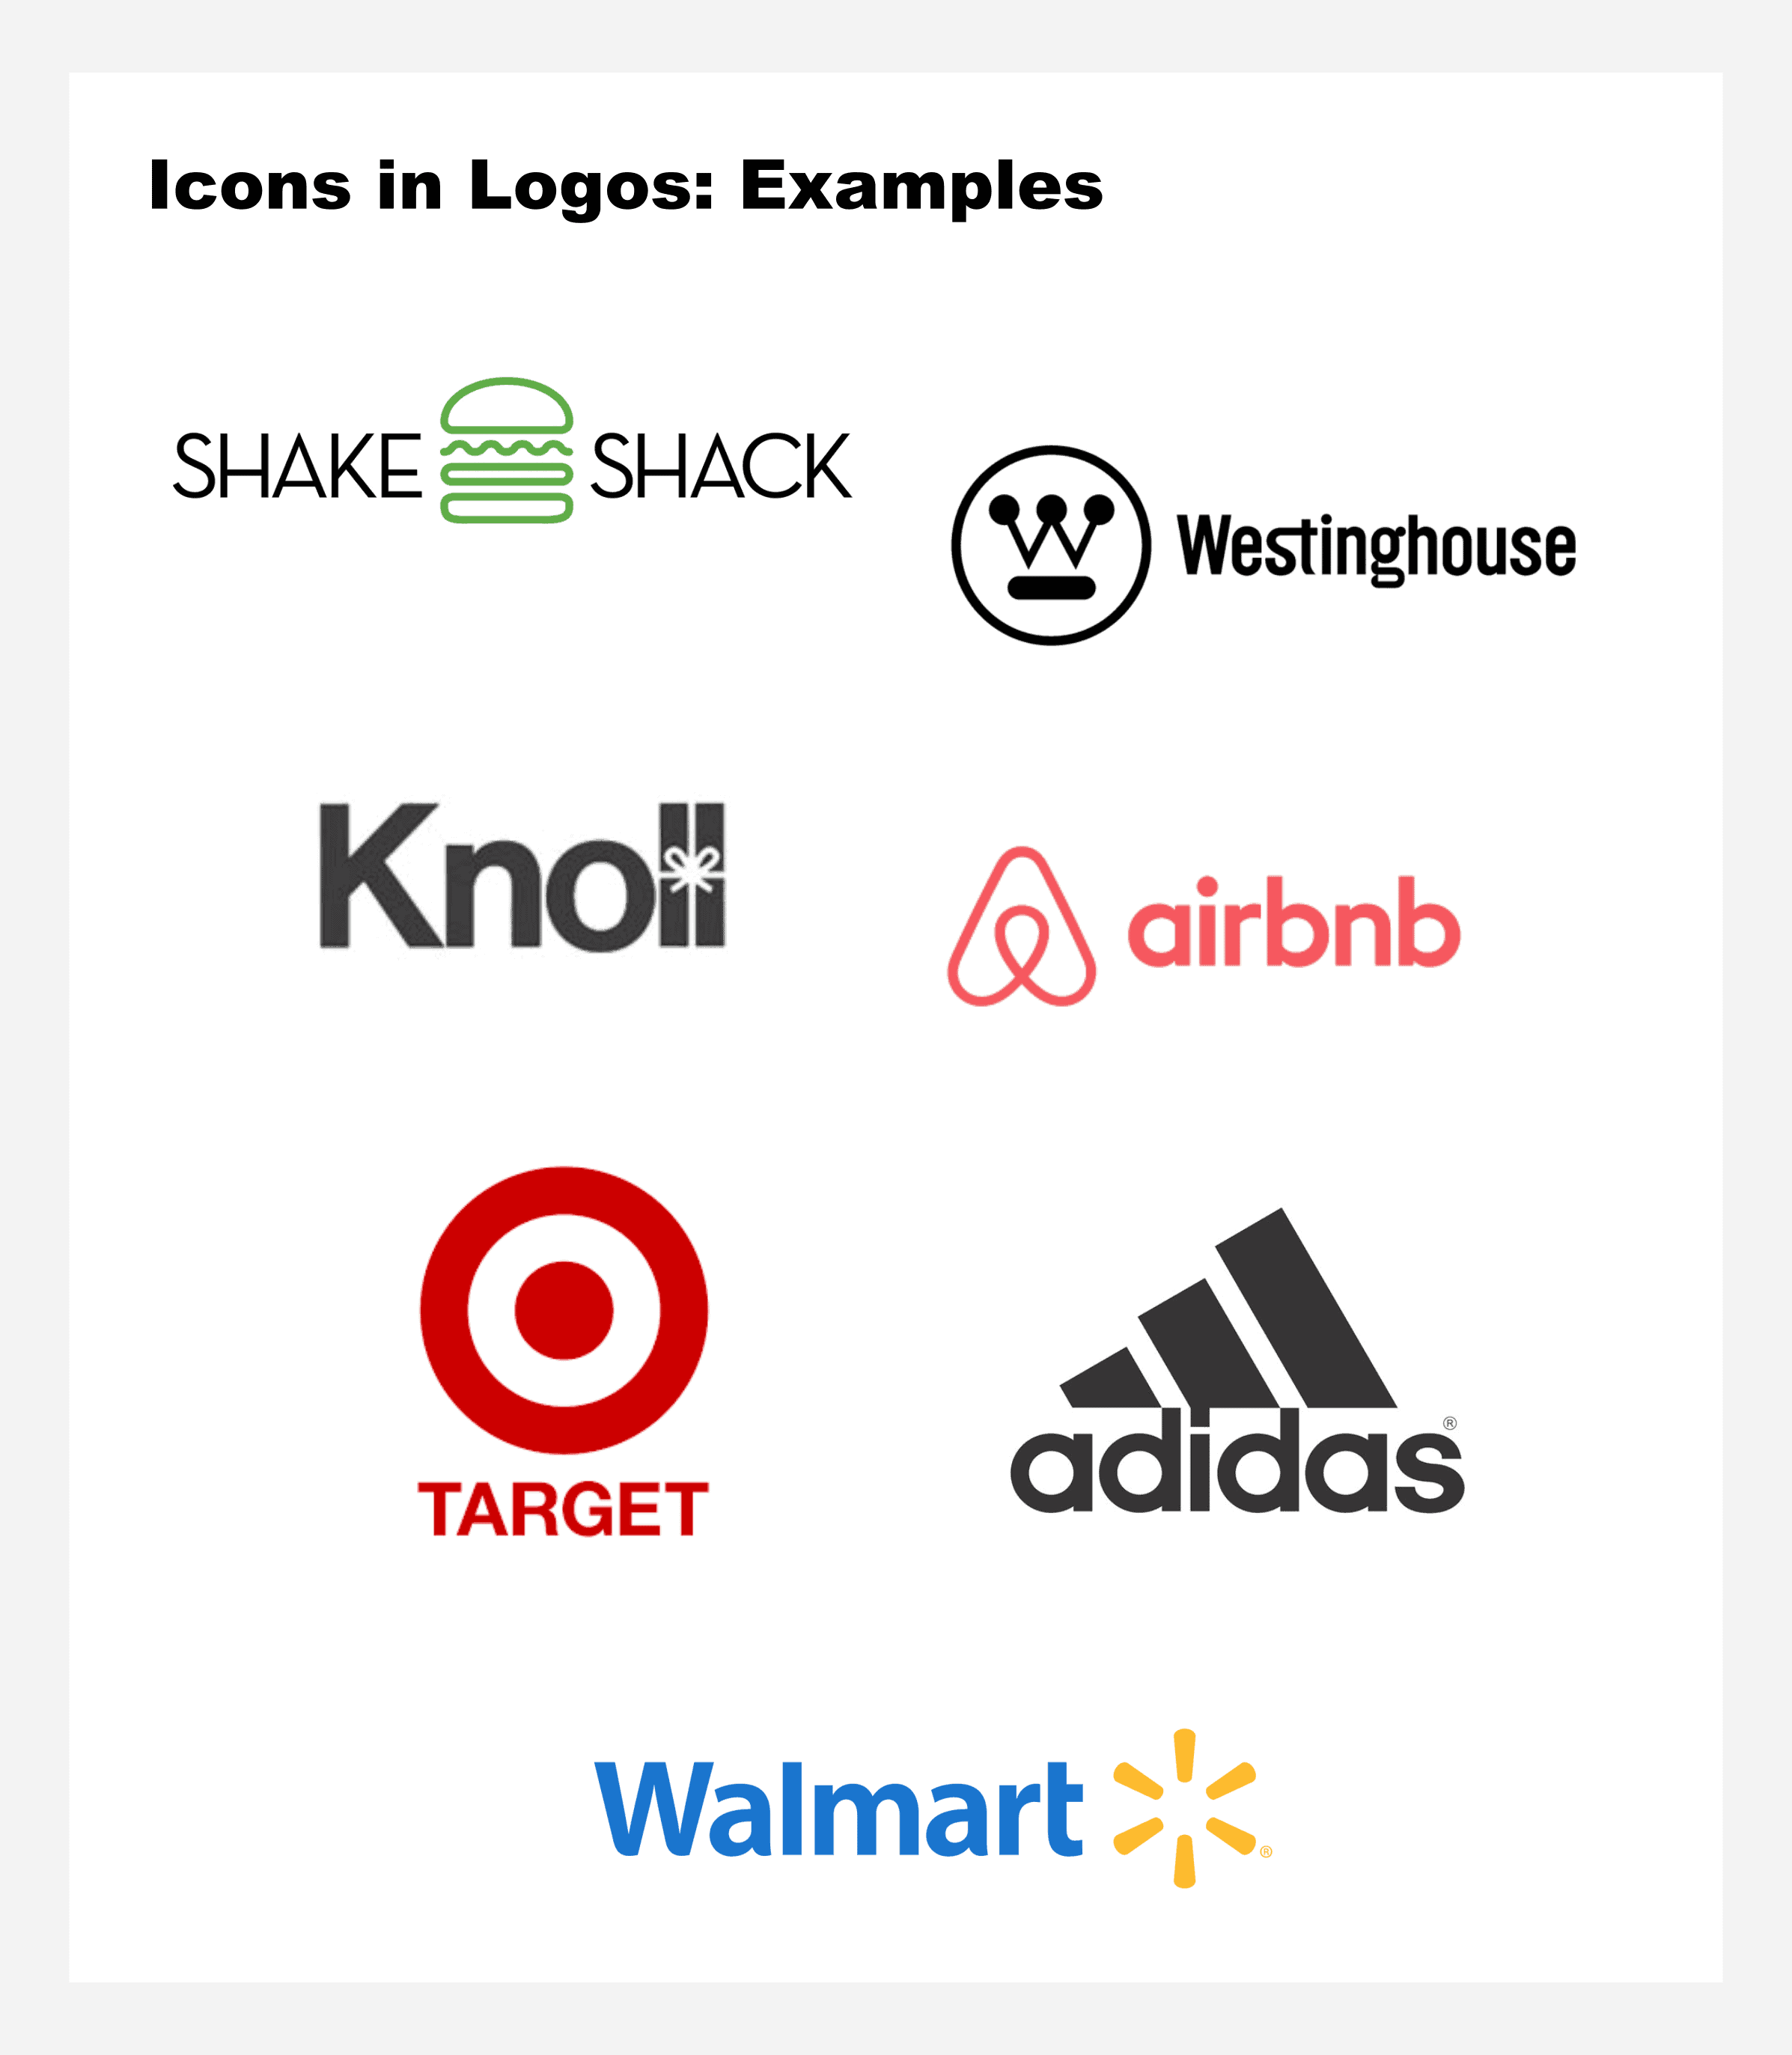 Famous logos using icons